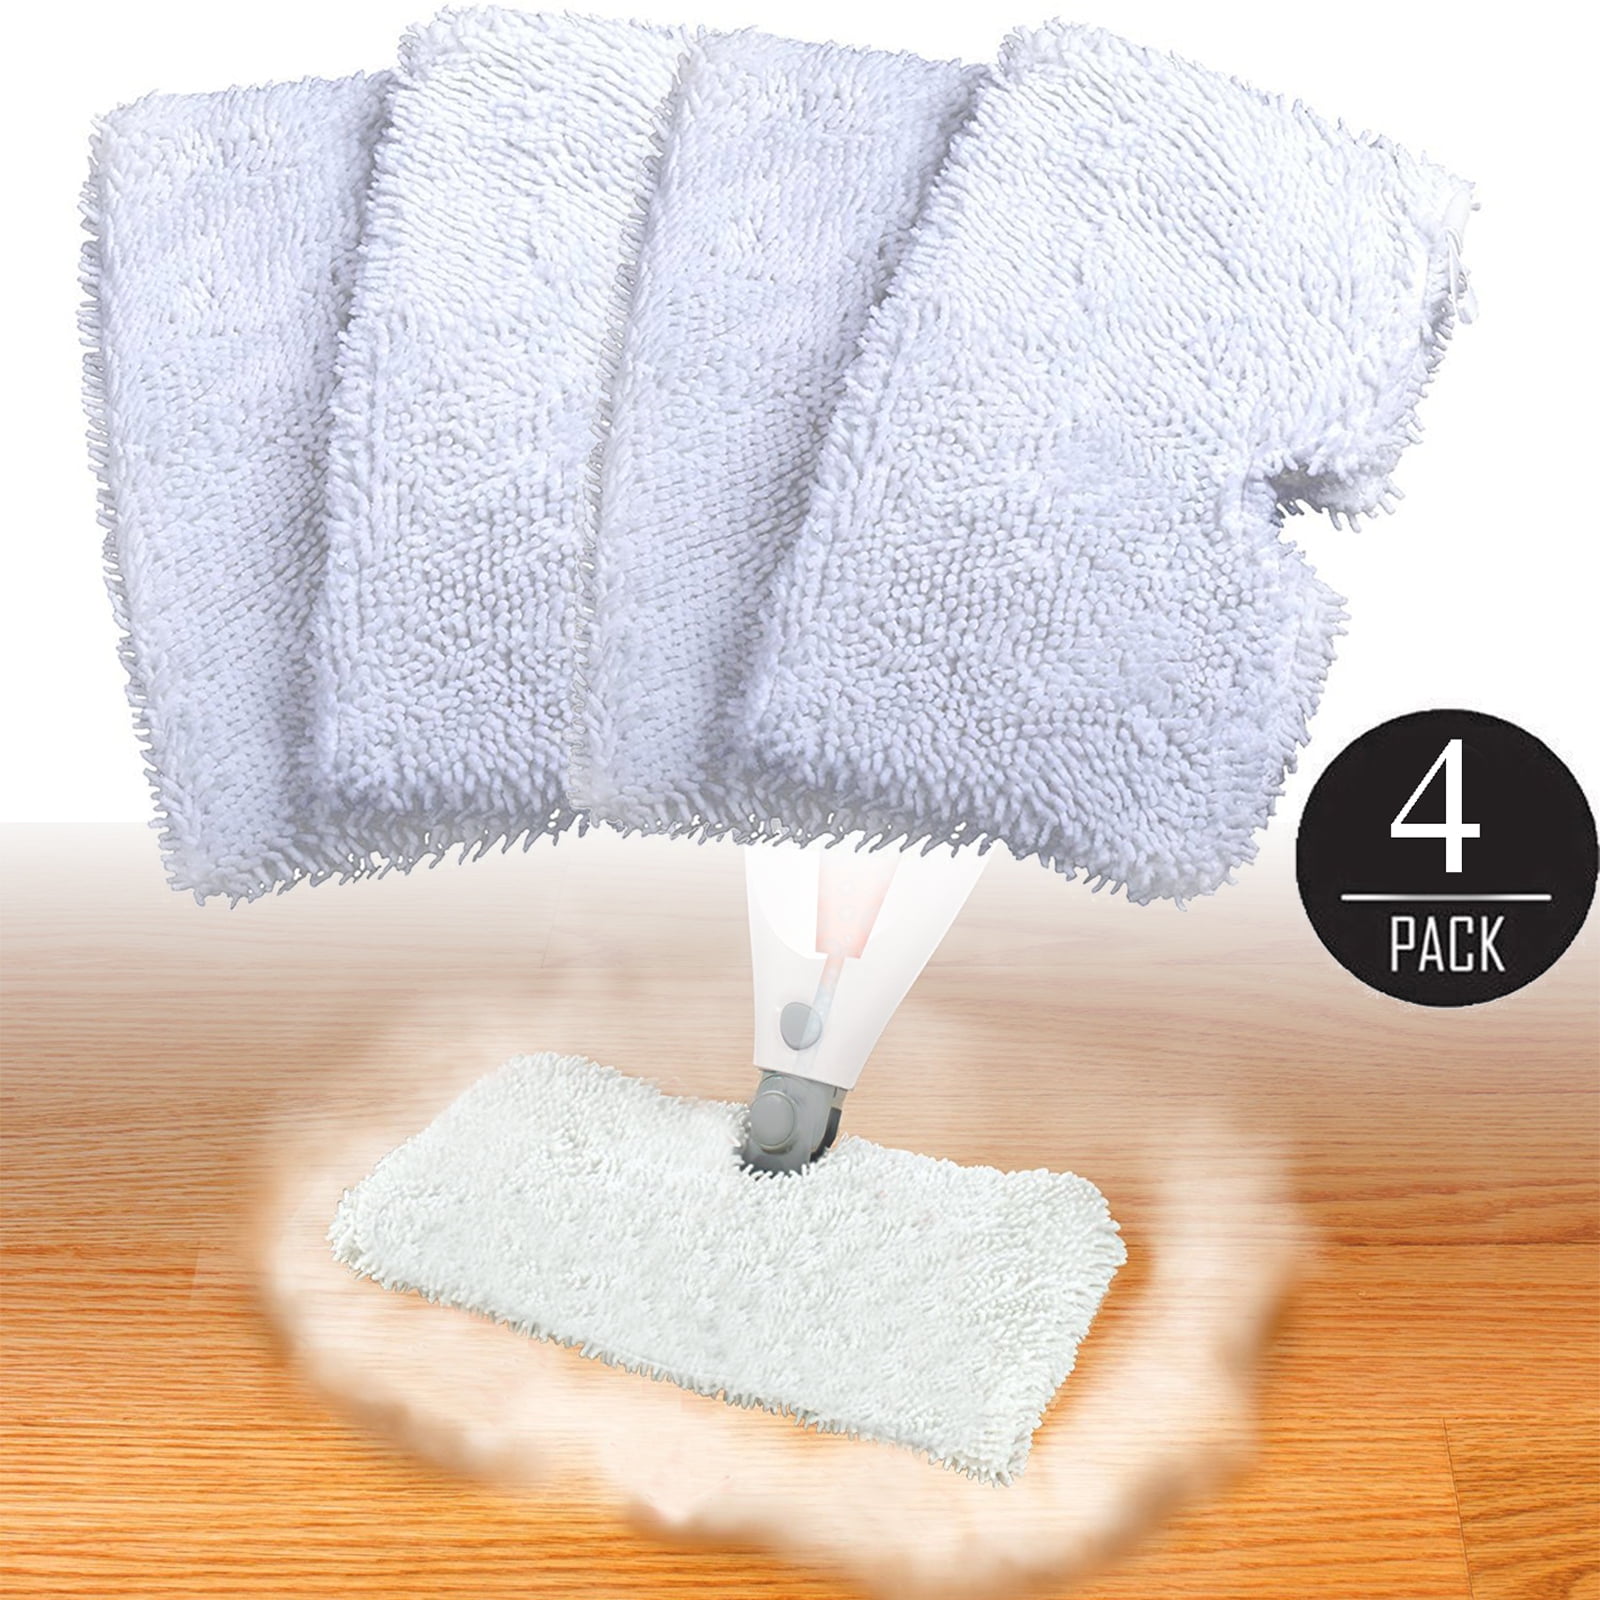 3Pcs/Set Mop Cloth Cleaning Pads for Shark S3550/S3901/S3601/S3501 Steam Mops 